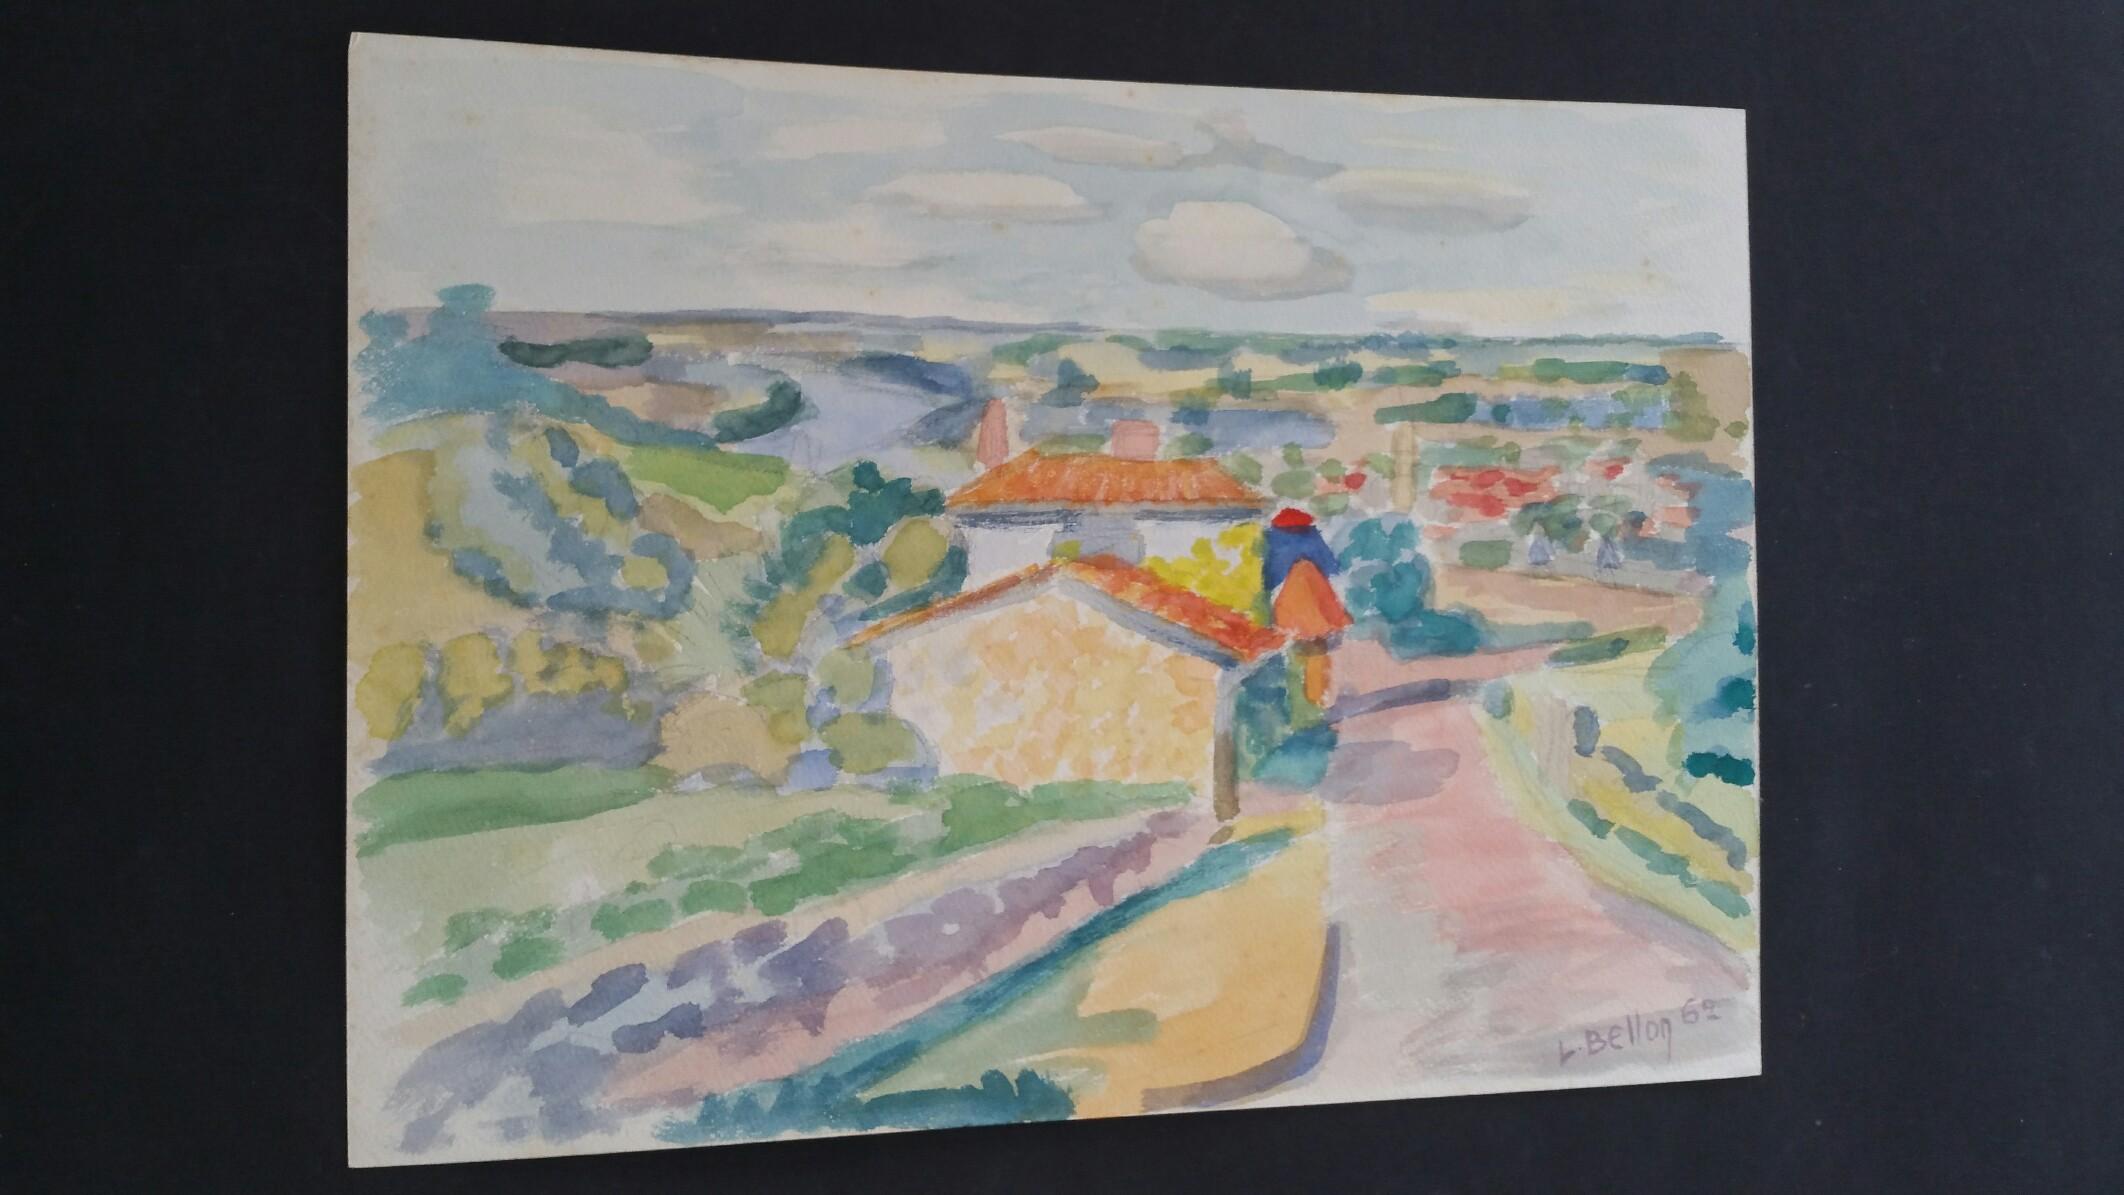 Provence Landscape, Panoramic View of a Riverside Village
by Louis Bellon (French 1908-1998)
Signed lower right, dated 62 (1962)
watercolour painting on paper, unframed
measurements: 9.25 x 12.75 inches

provenance: private collection of the artists